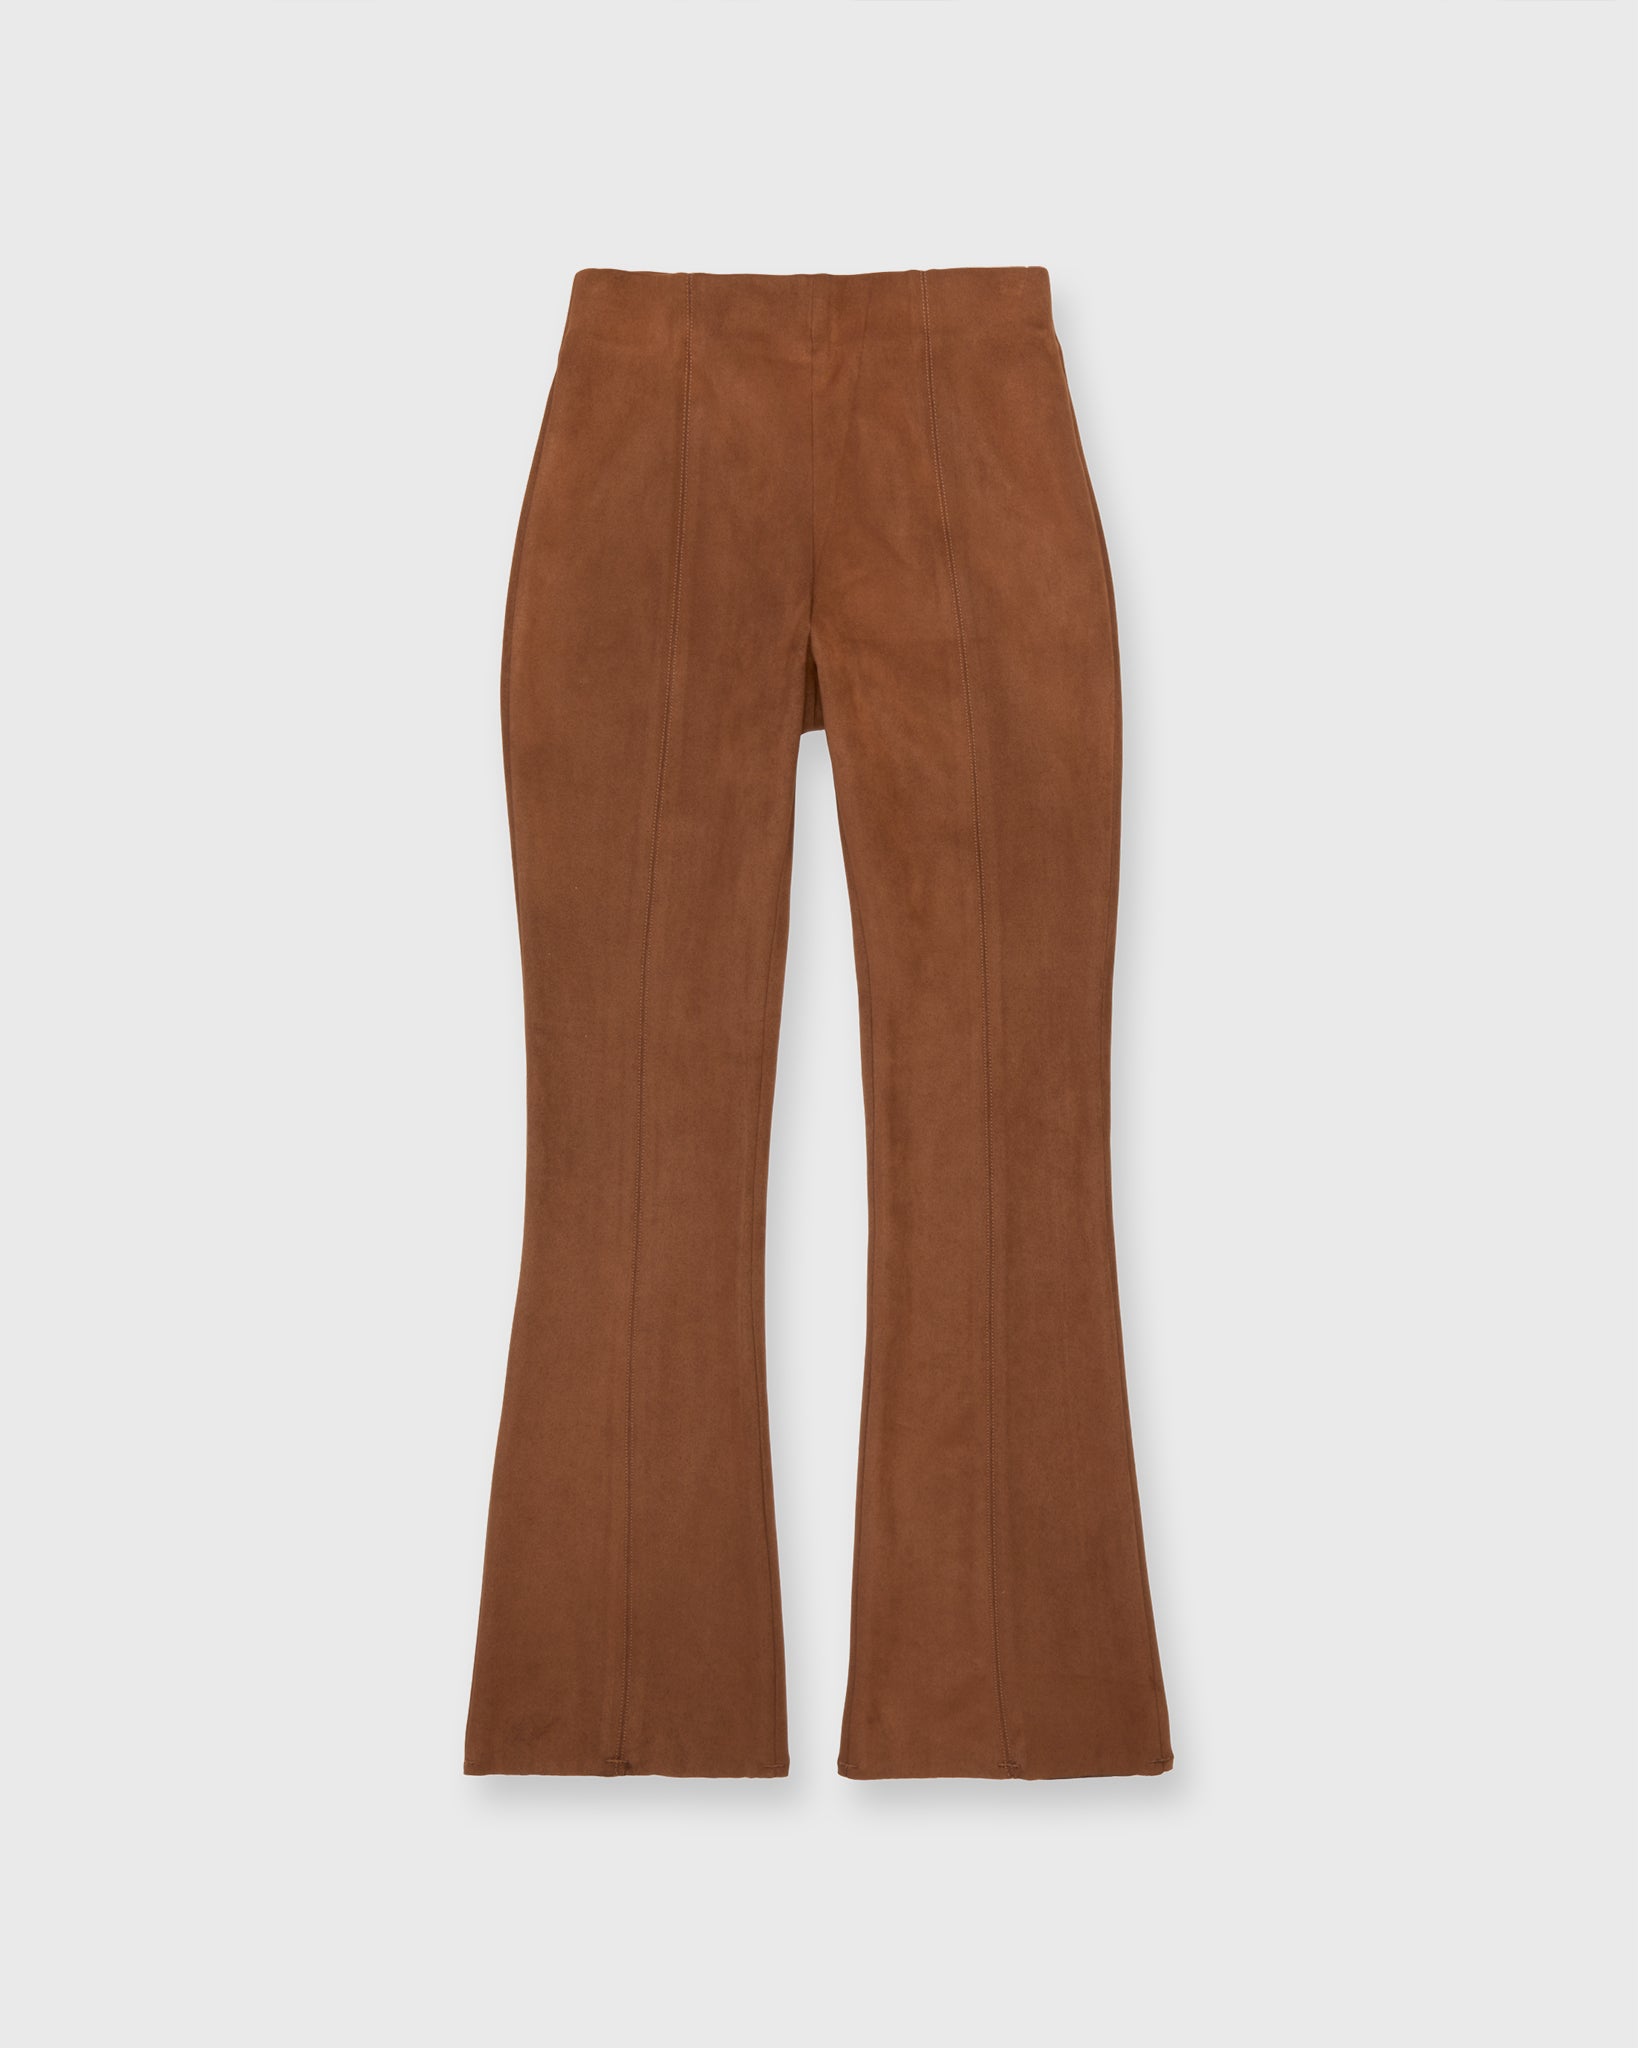 Faye Flare Cropped Seamed Pant in Cognac Vegan Suede